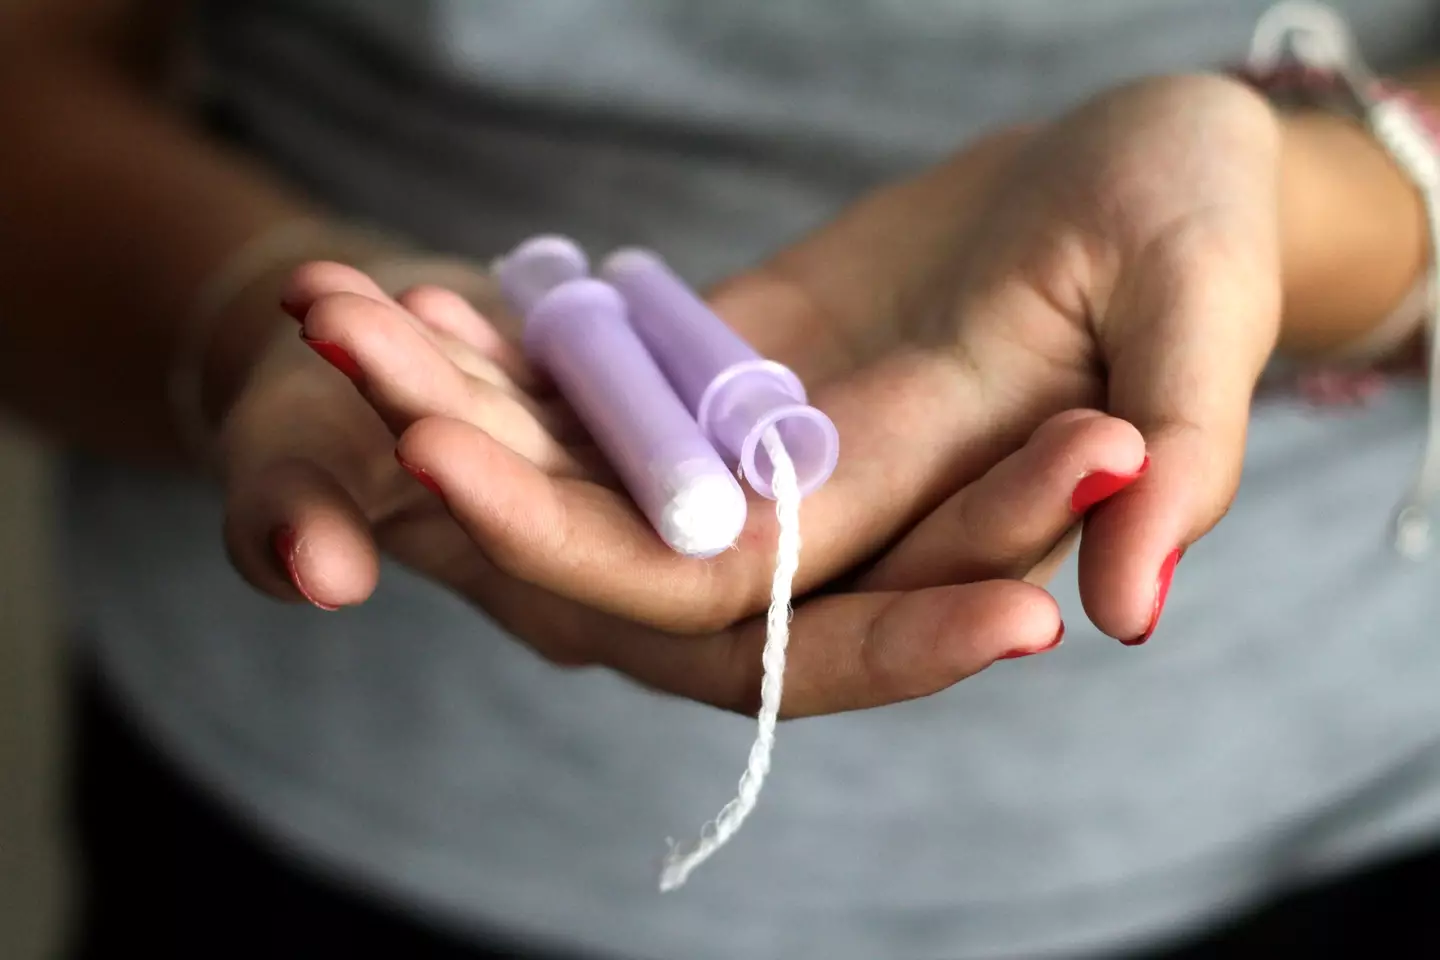 The NHS has shared its official advice on toxic shock syndrome (TSS). (Isabel Pavia / Getty Images)